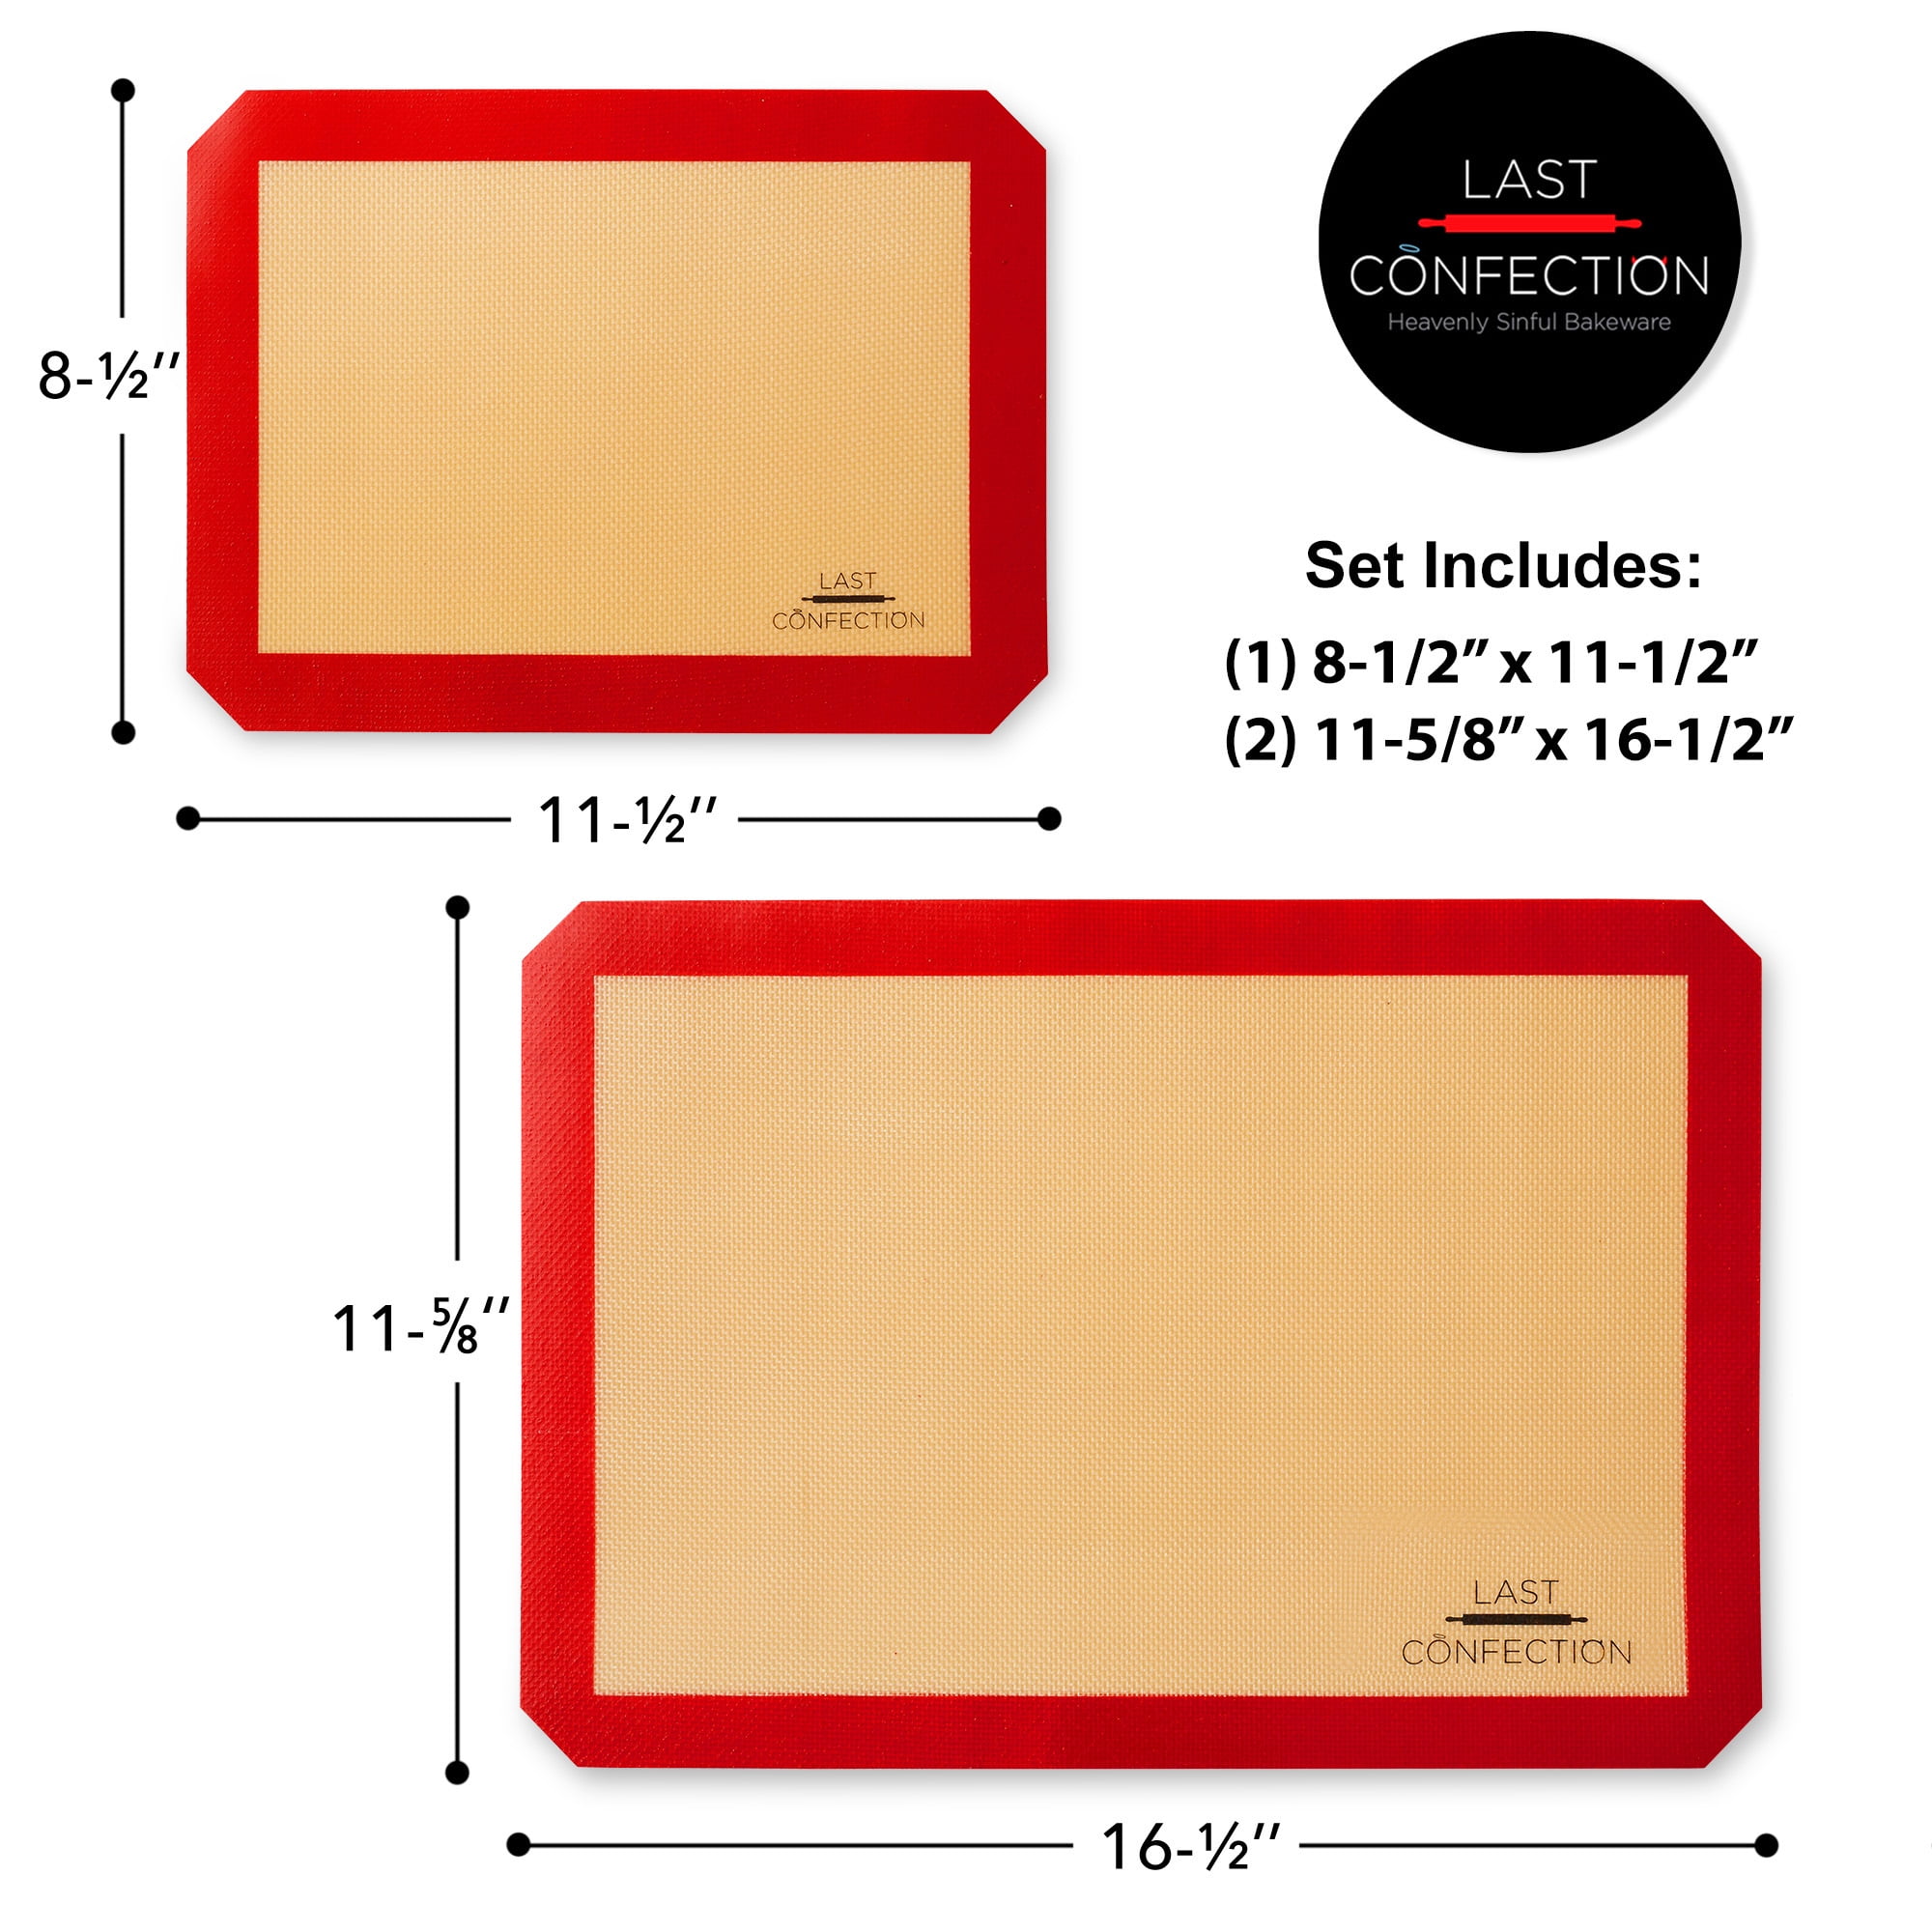 2pc Silicone Baking Mats, (8-1/2 x 11-1/2 ) - Last Confection, 2